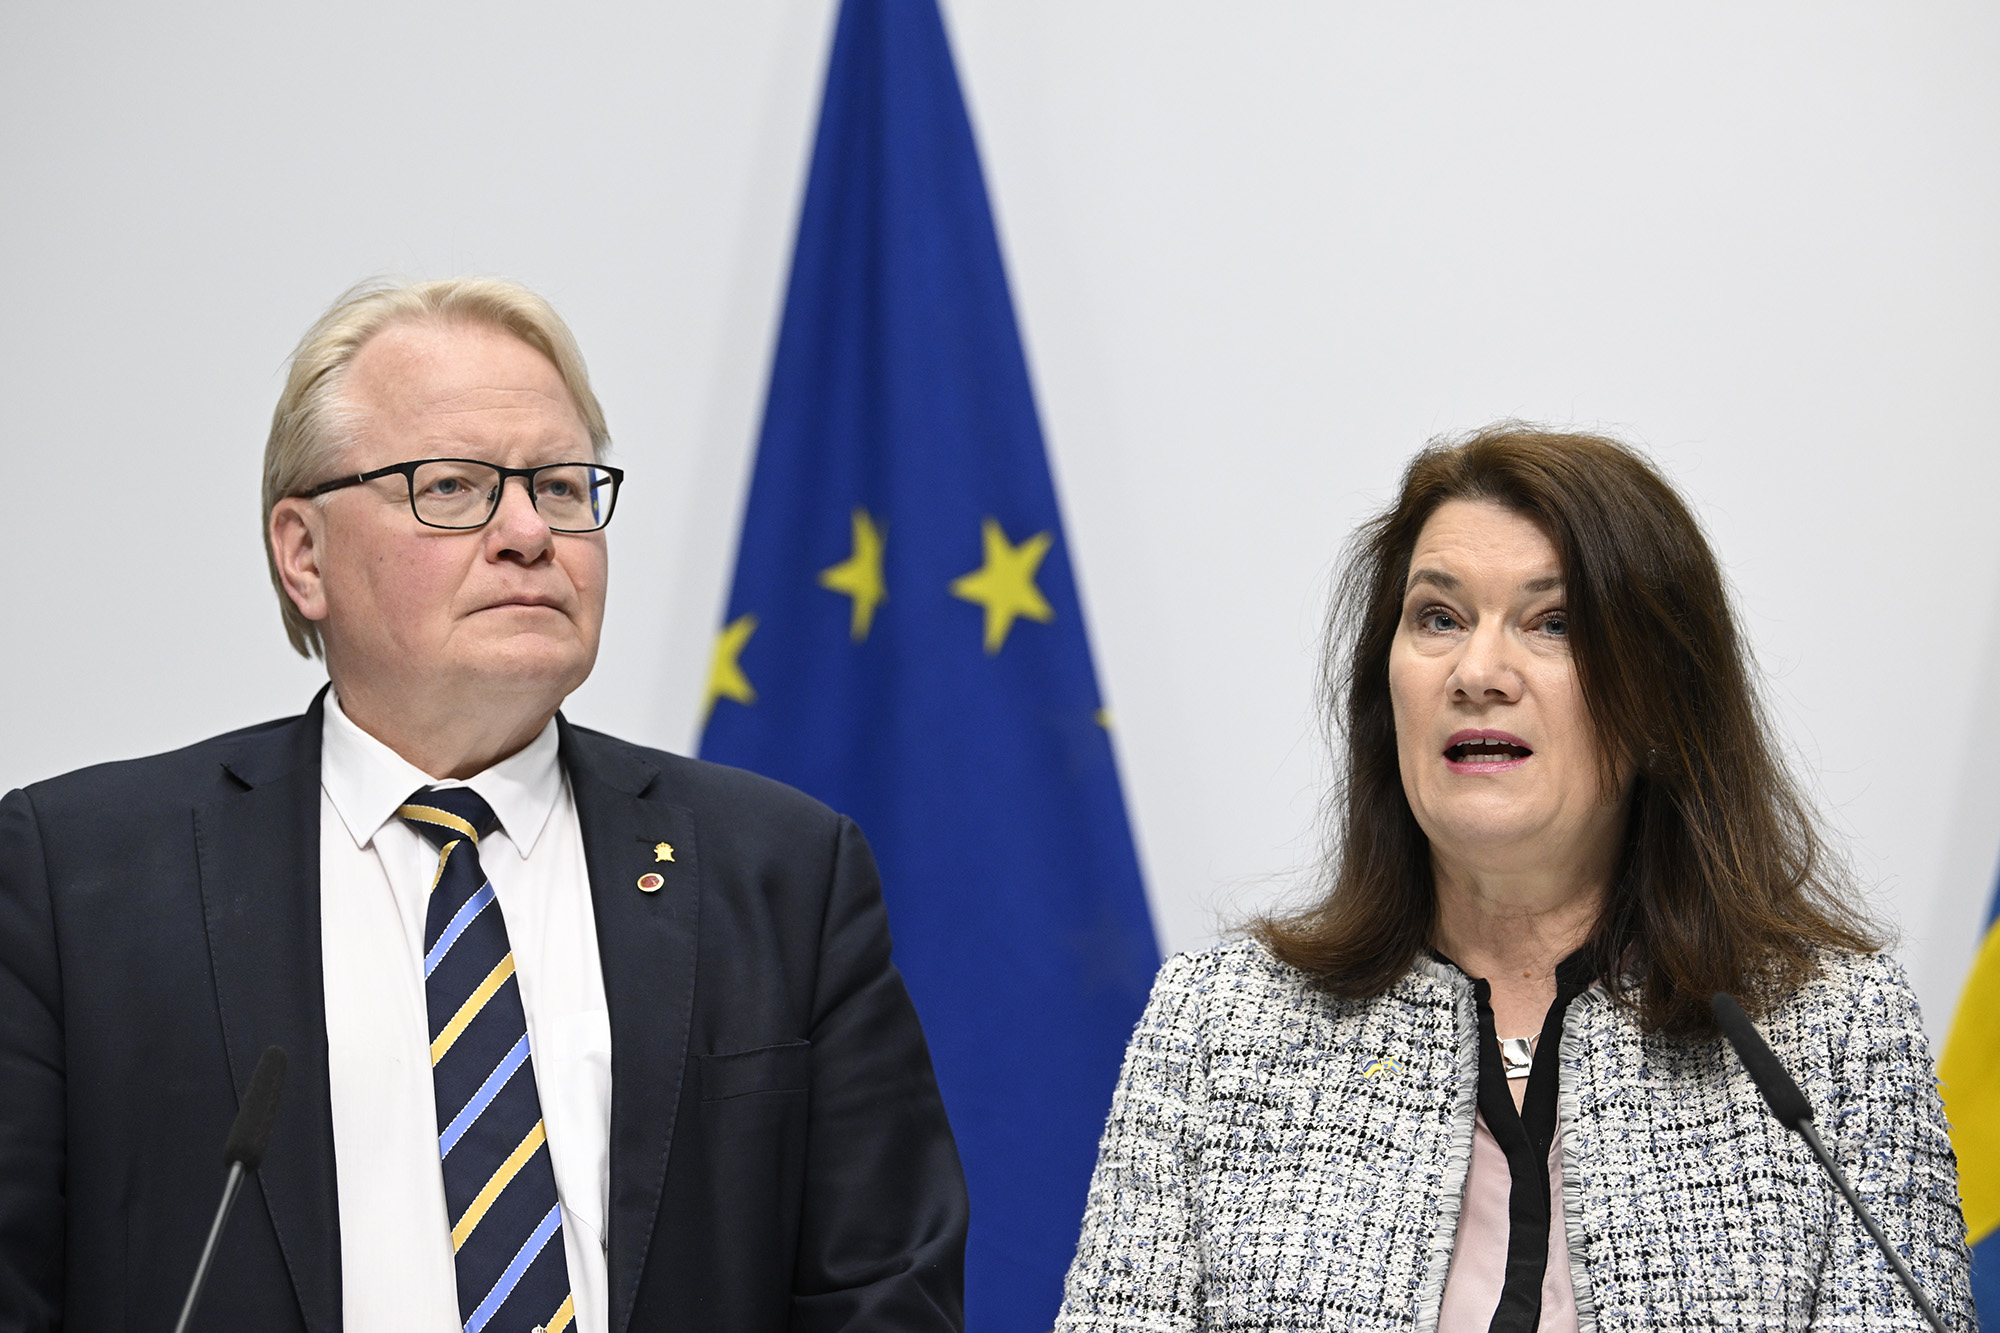 Minister of Defense Peter Hultqvist, left, and Minister of Foreign Affairs Ann Linde present a security policy analysis during a press conference in Stockholm, Sweden, Friday, on May 13.